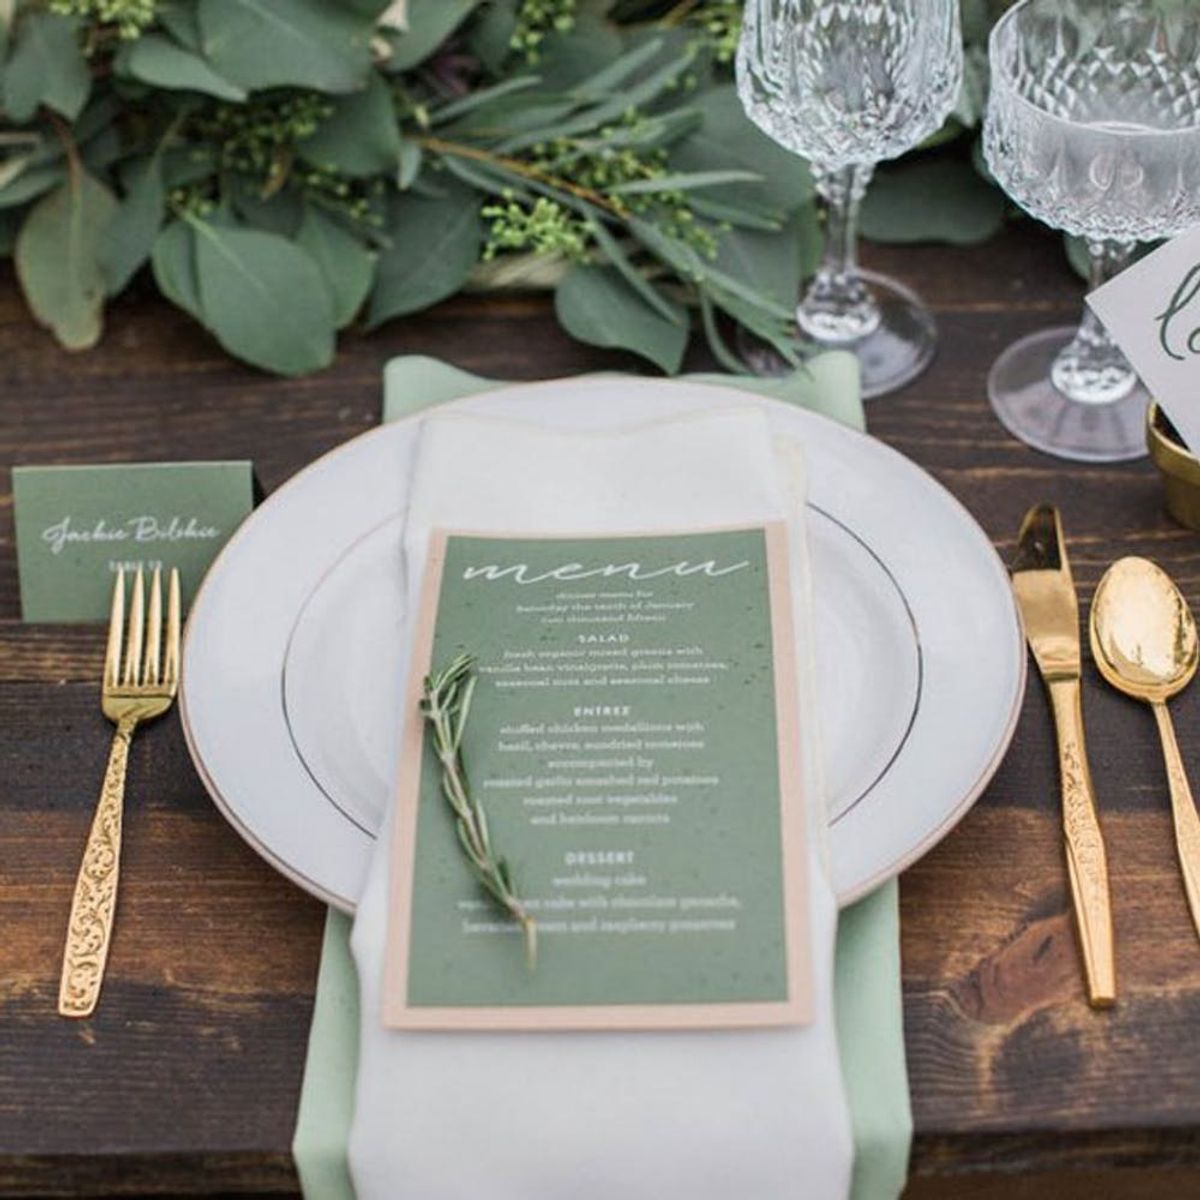 15 Gorgeous Pantone Wedding Ideas That Will Bring ALL the Greenery